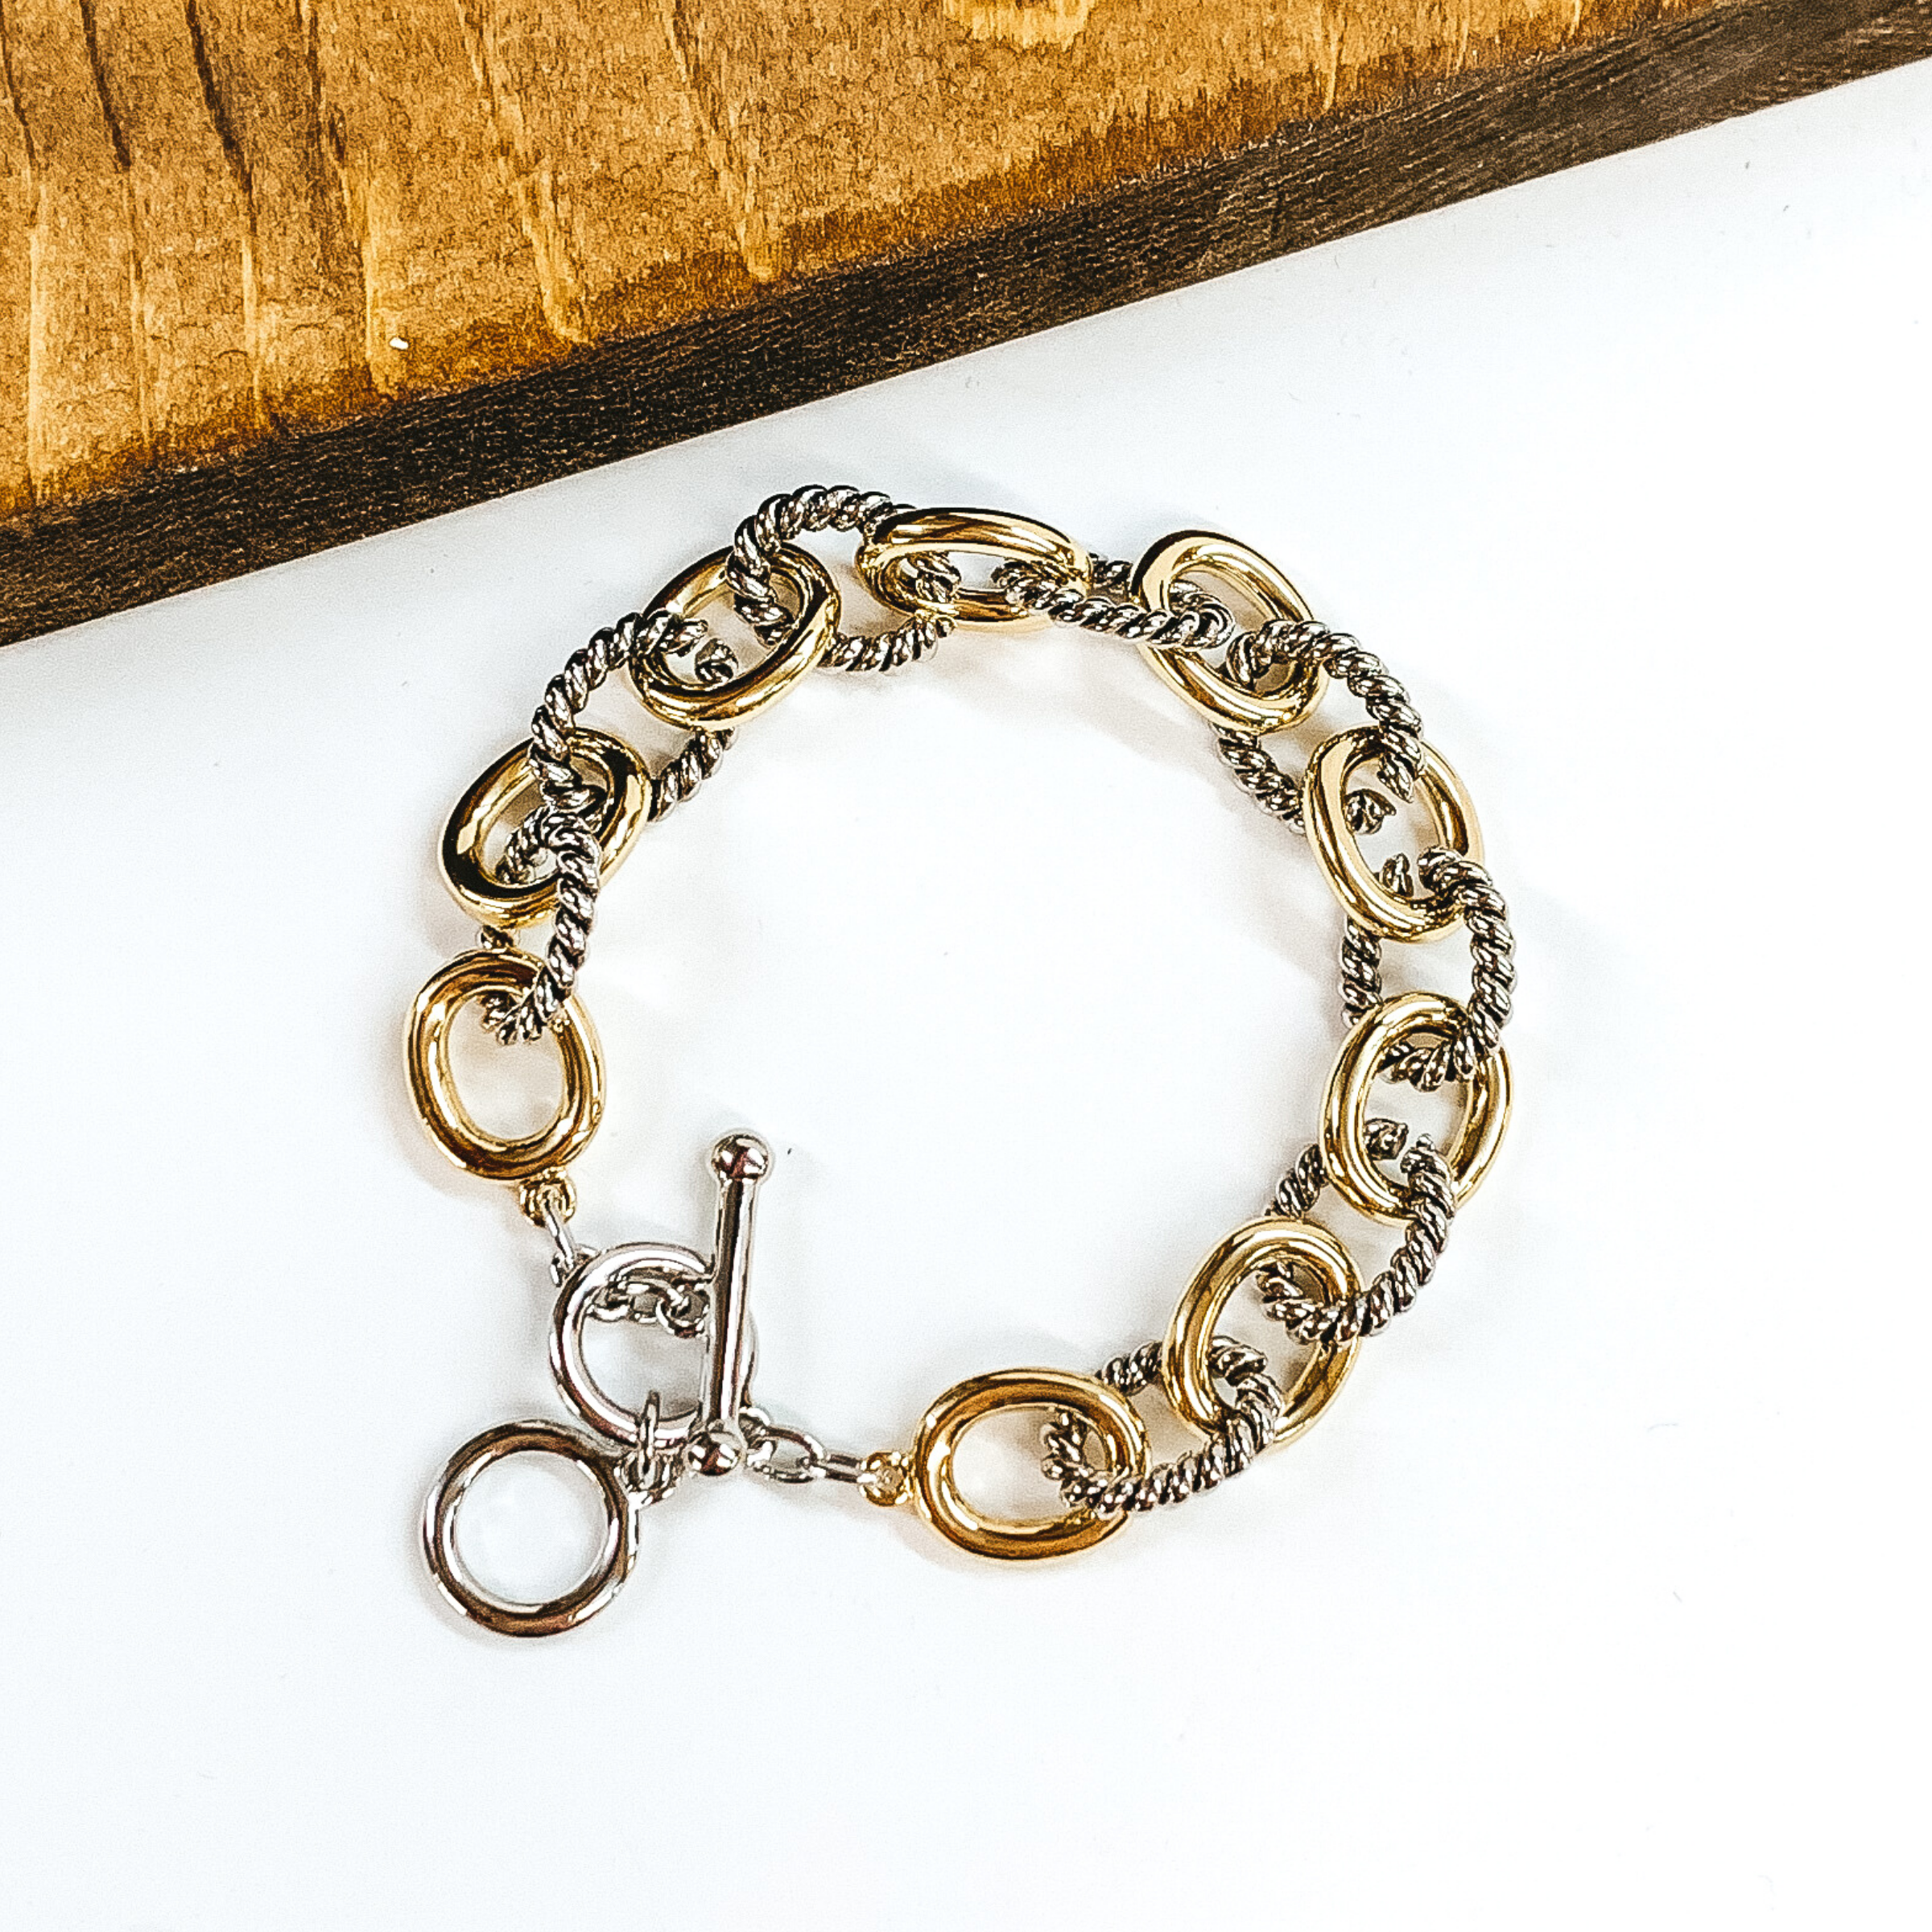 Small silver, twisted oval chain linked with smooth, gold chain links bracelet. This bracelet has a toggle clasp. This bracelet is pictured on a white background.